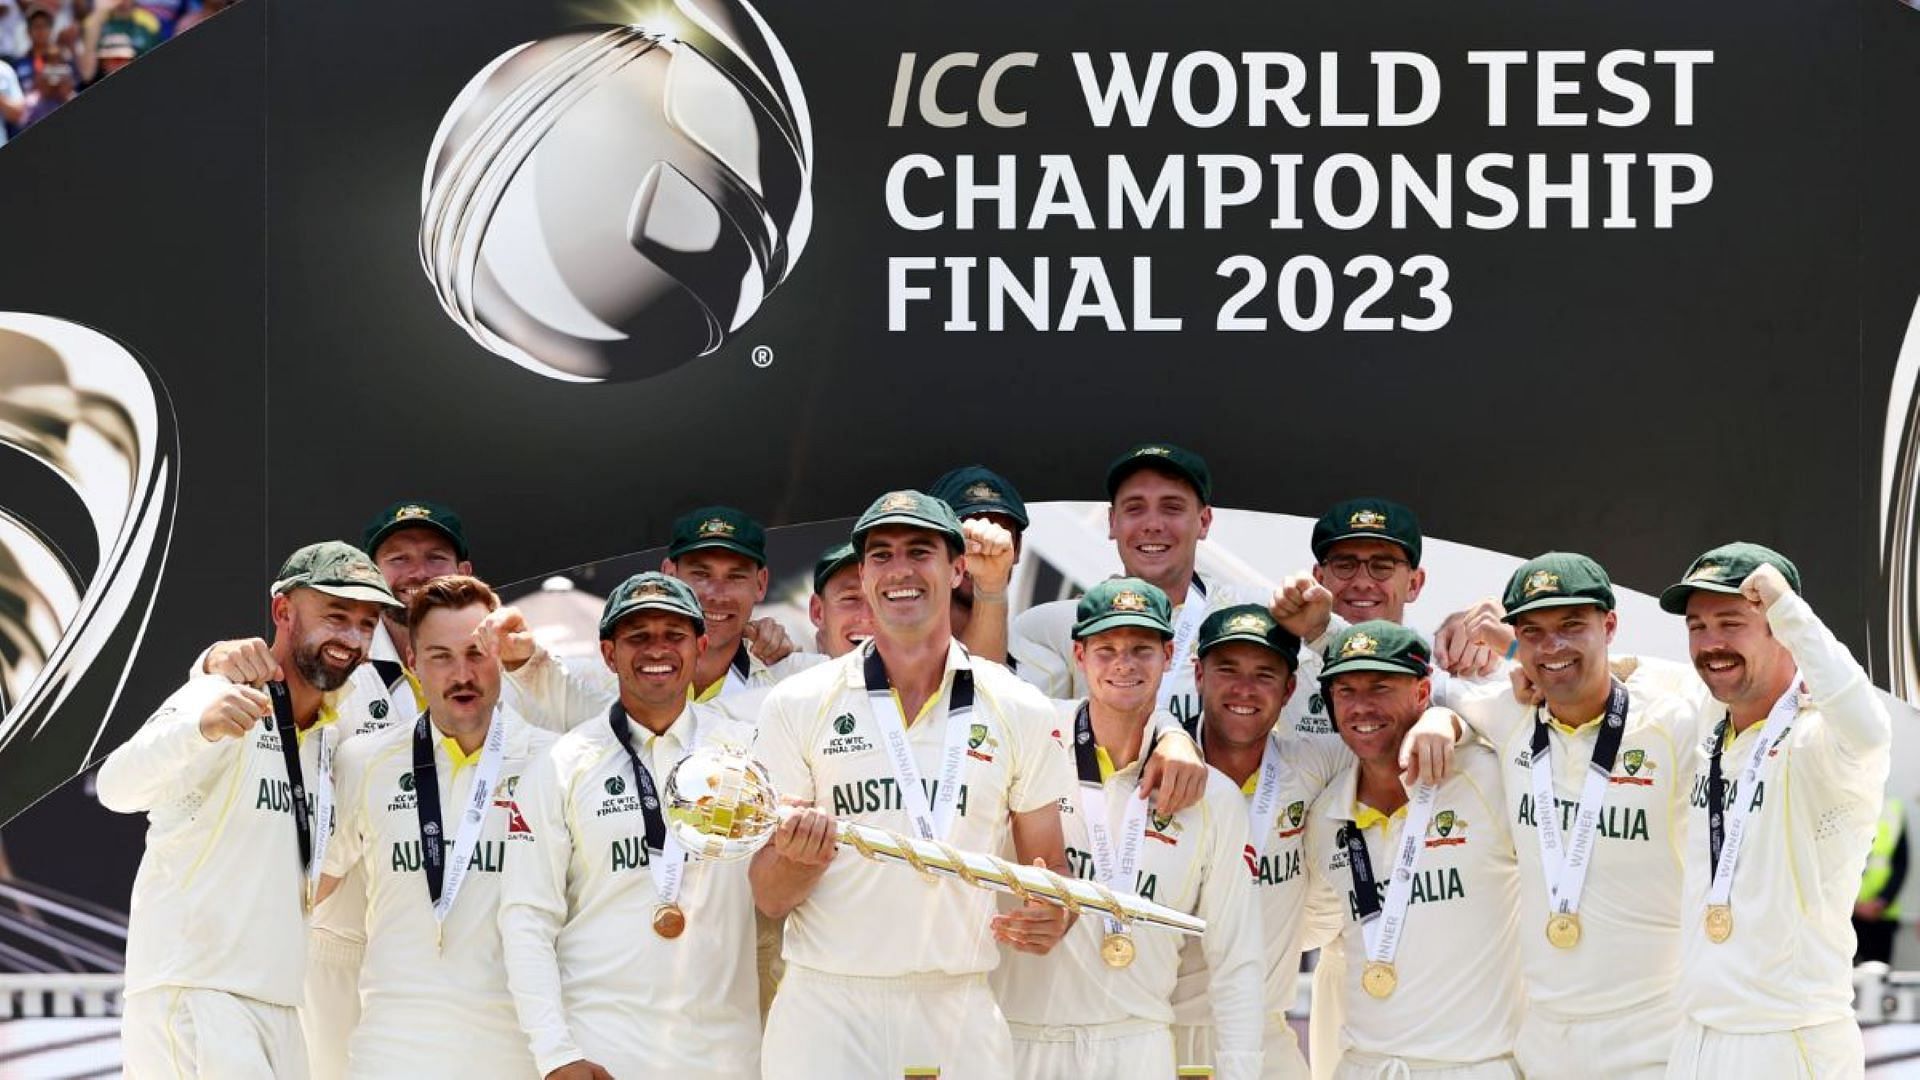 Australia added the WTC title to their exclusive ICC Trophy cabinet